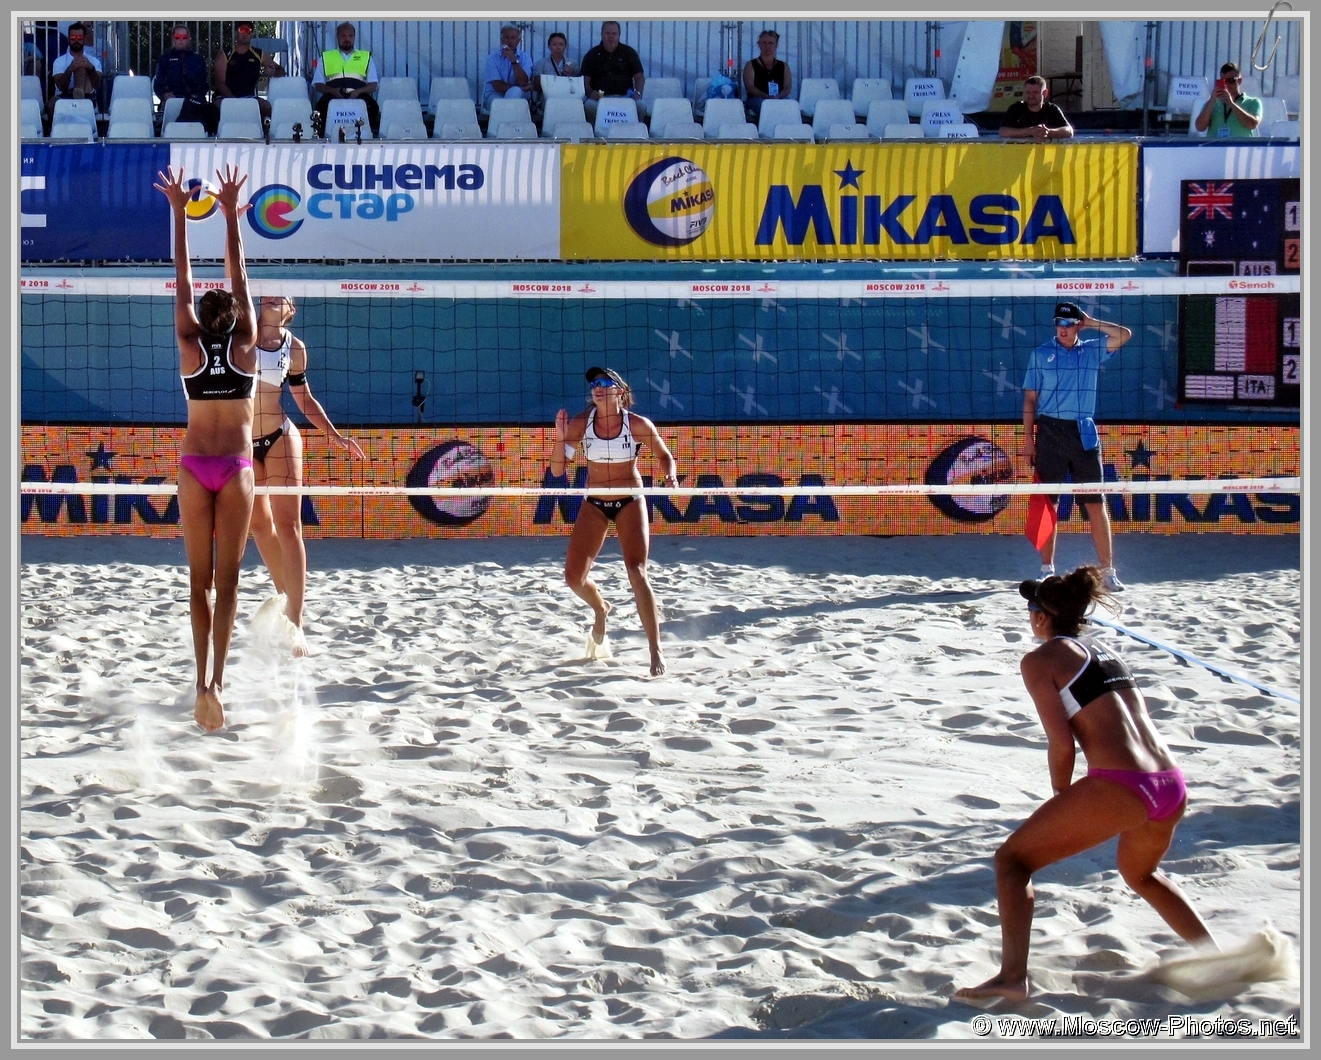 Taliqua Clancy and Mariafe Artacho del Solar - Australian Team at FIVB Beach Volleyball World Tour in Moscow 2018